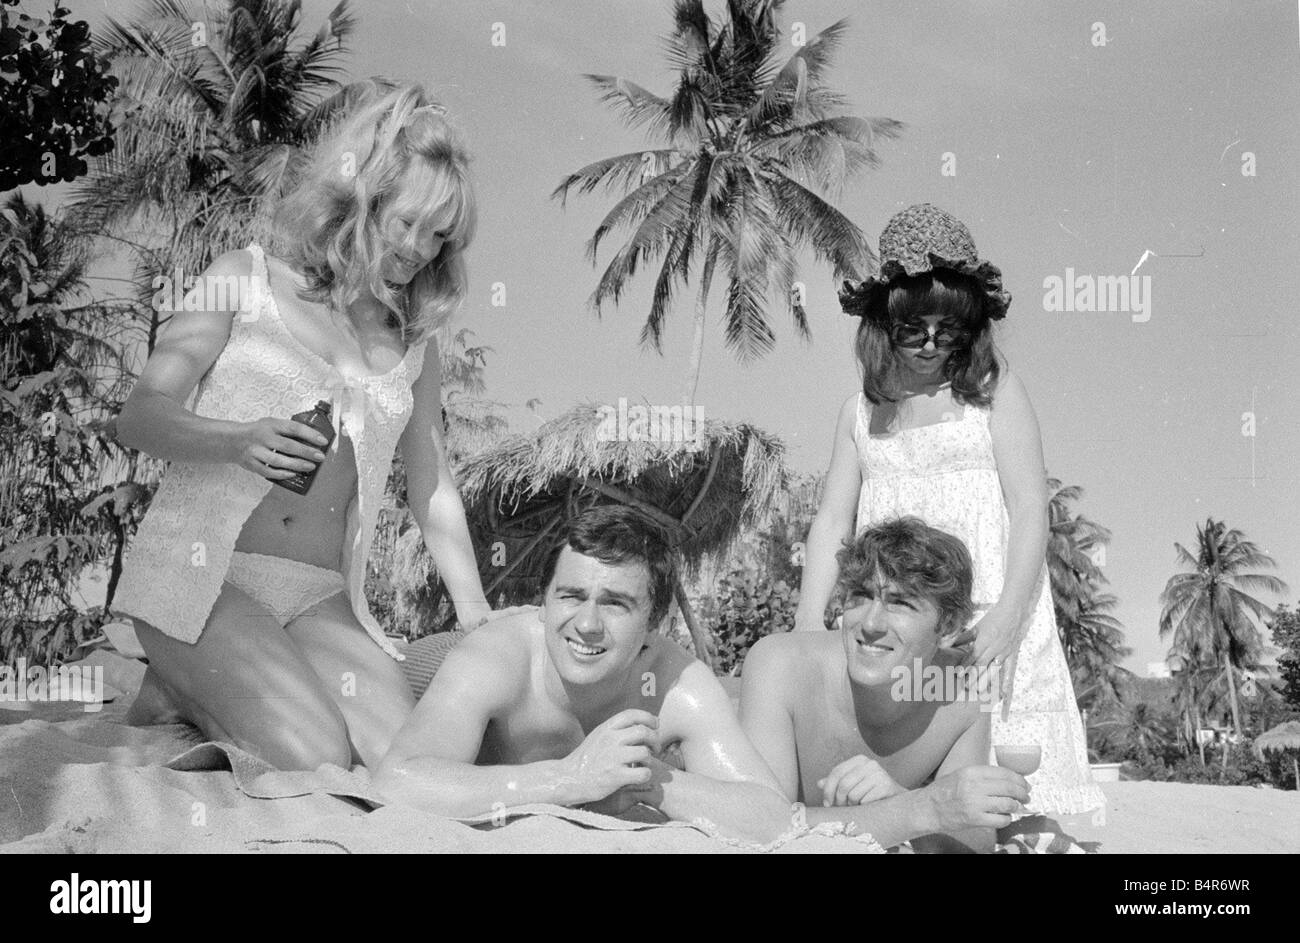 Comedian actor and publisher Peter Cook with his wife Wendy right with Dudley Moore and Suzy Kendall seen here having suntan oil rubbed into their backs during a holiday in Grenada March 1966 Stock Photo